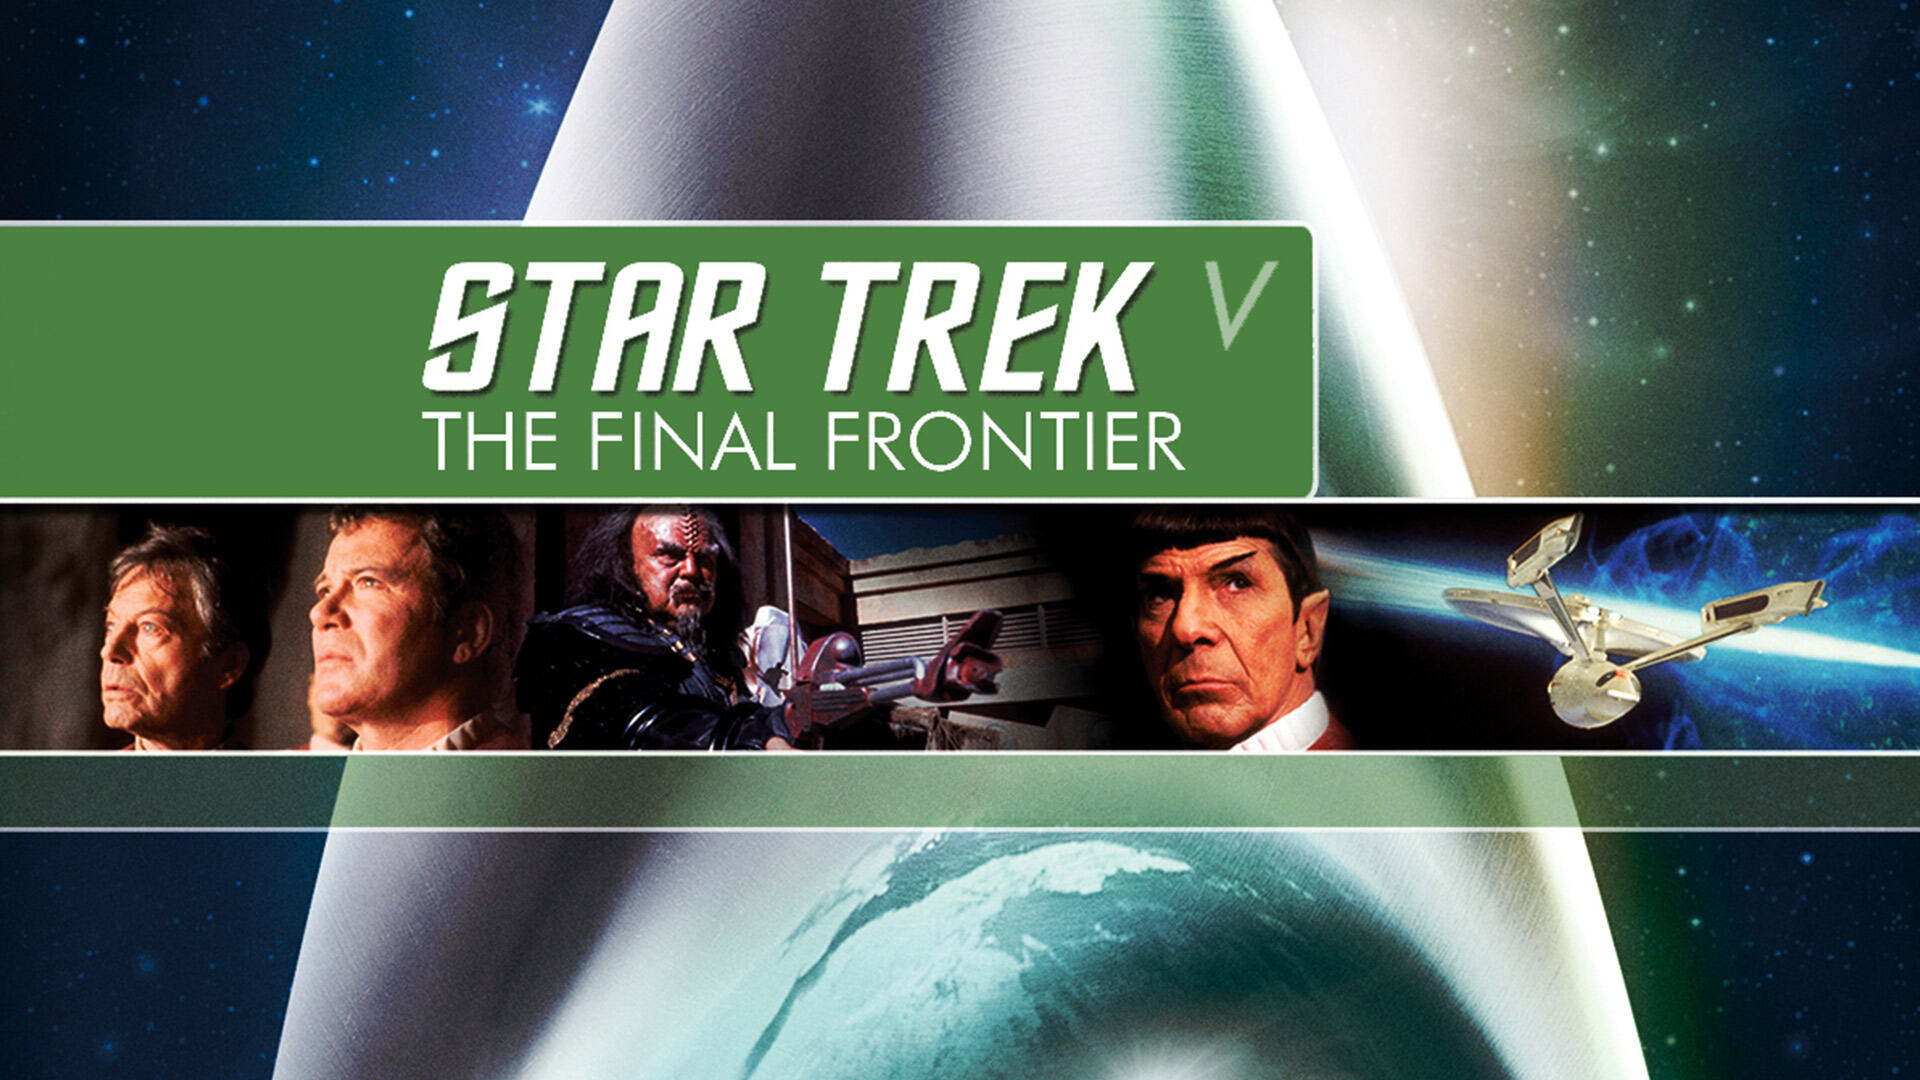 39-facts-about-the-movie-star-trek-v-the-final-frontier